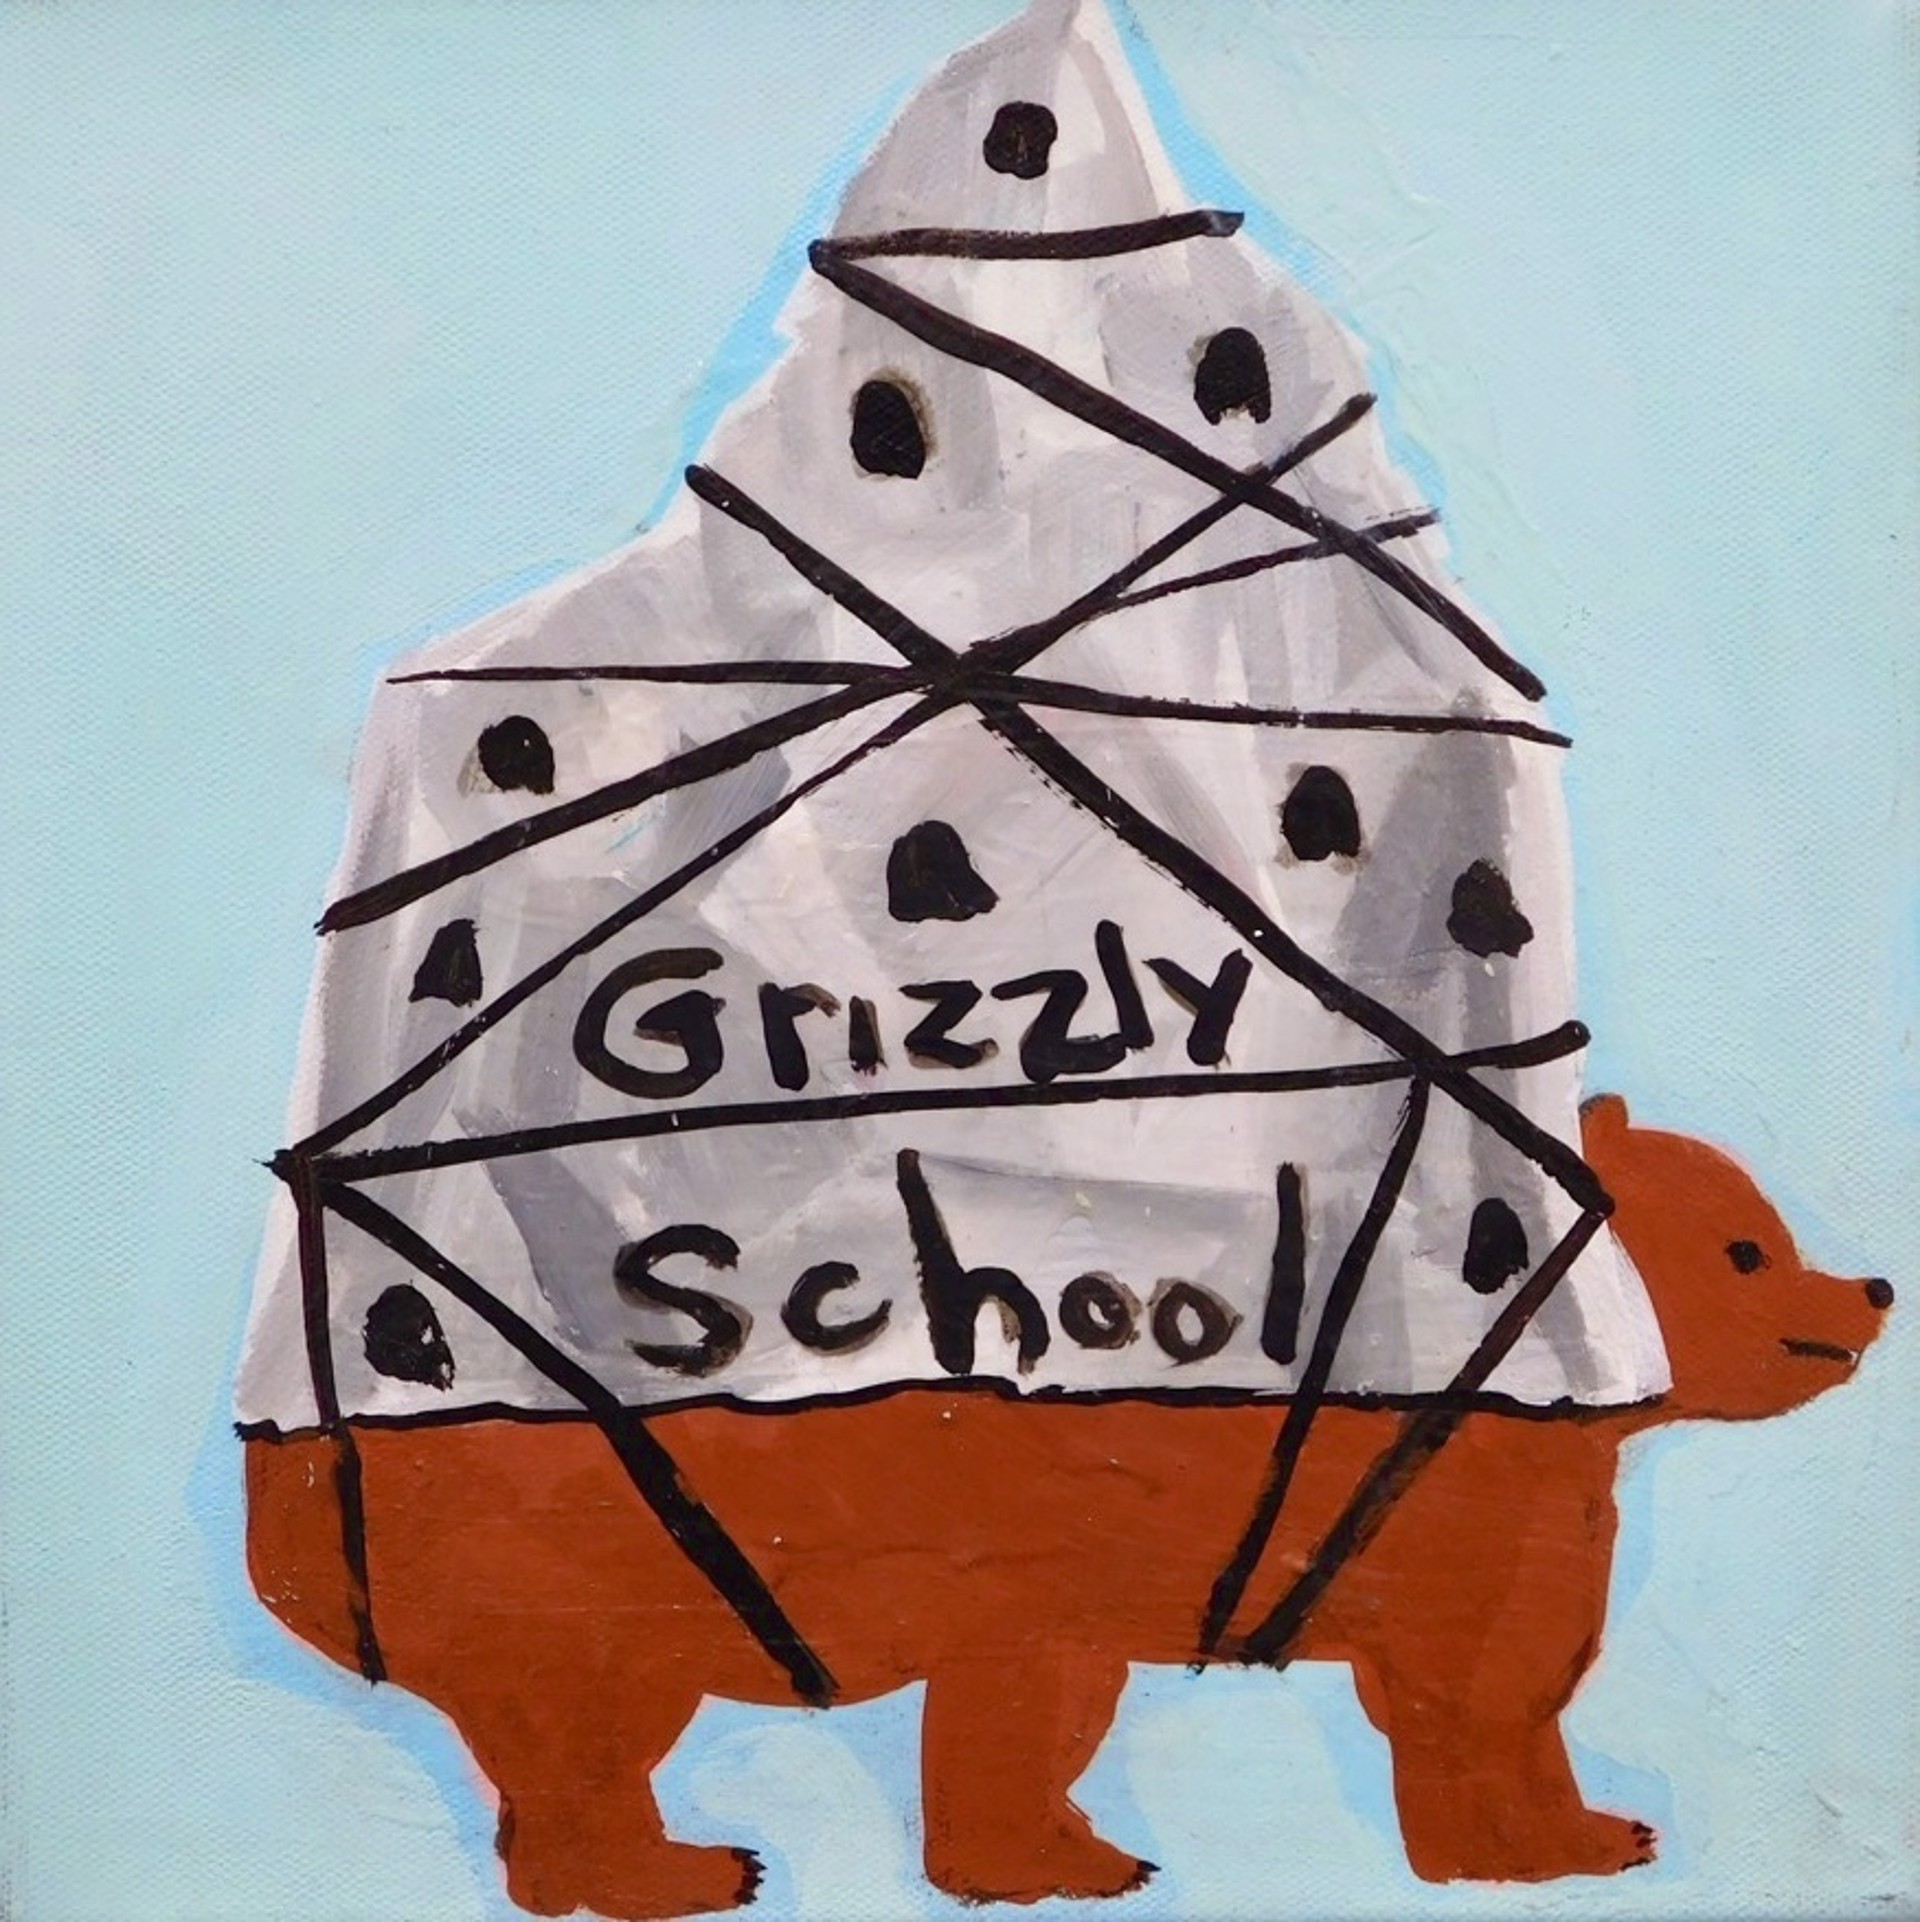 Grizzly School by Brian Leo